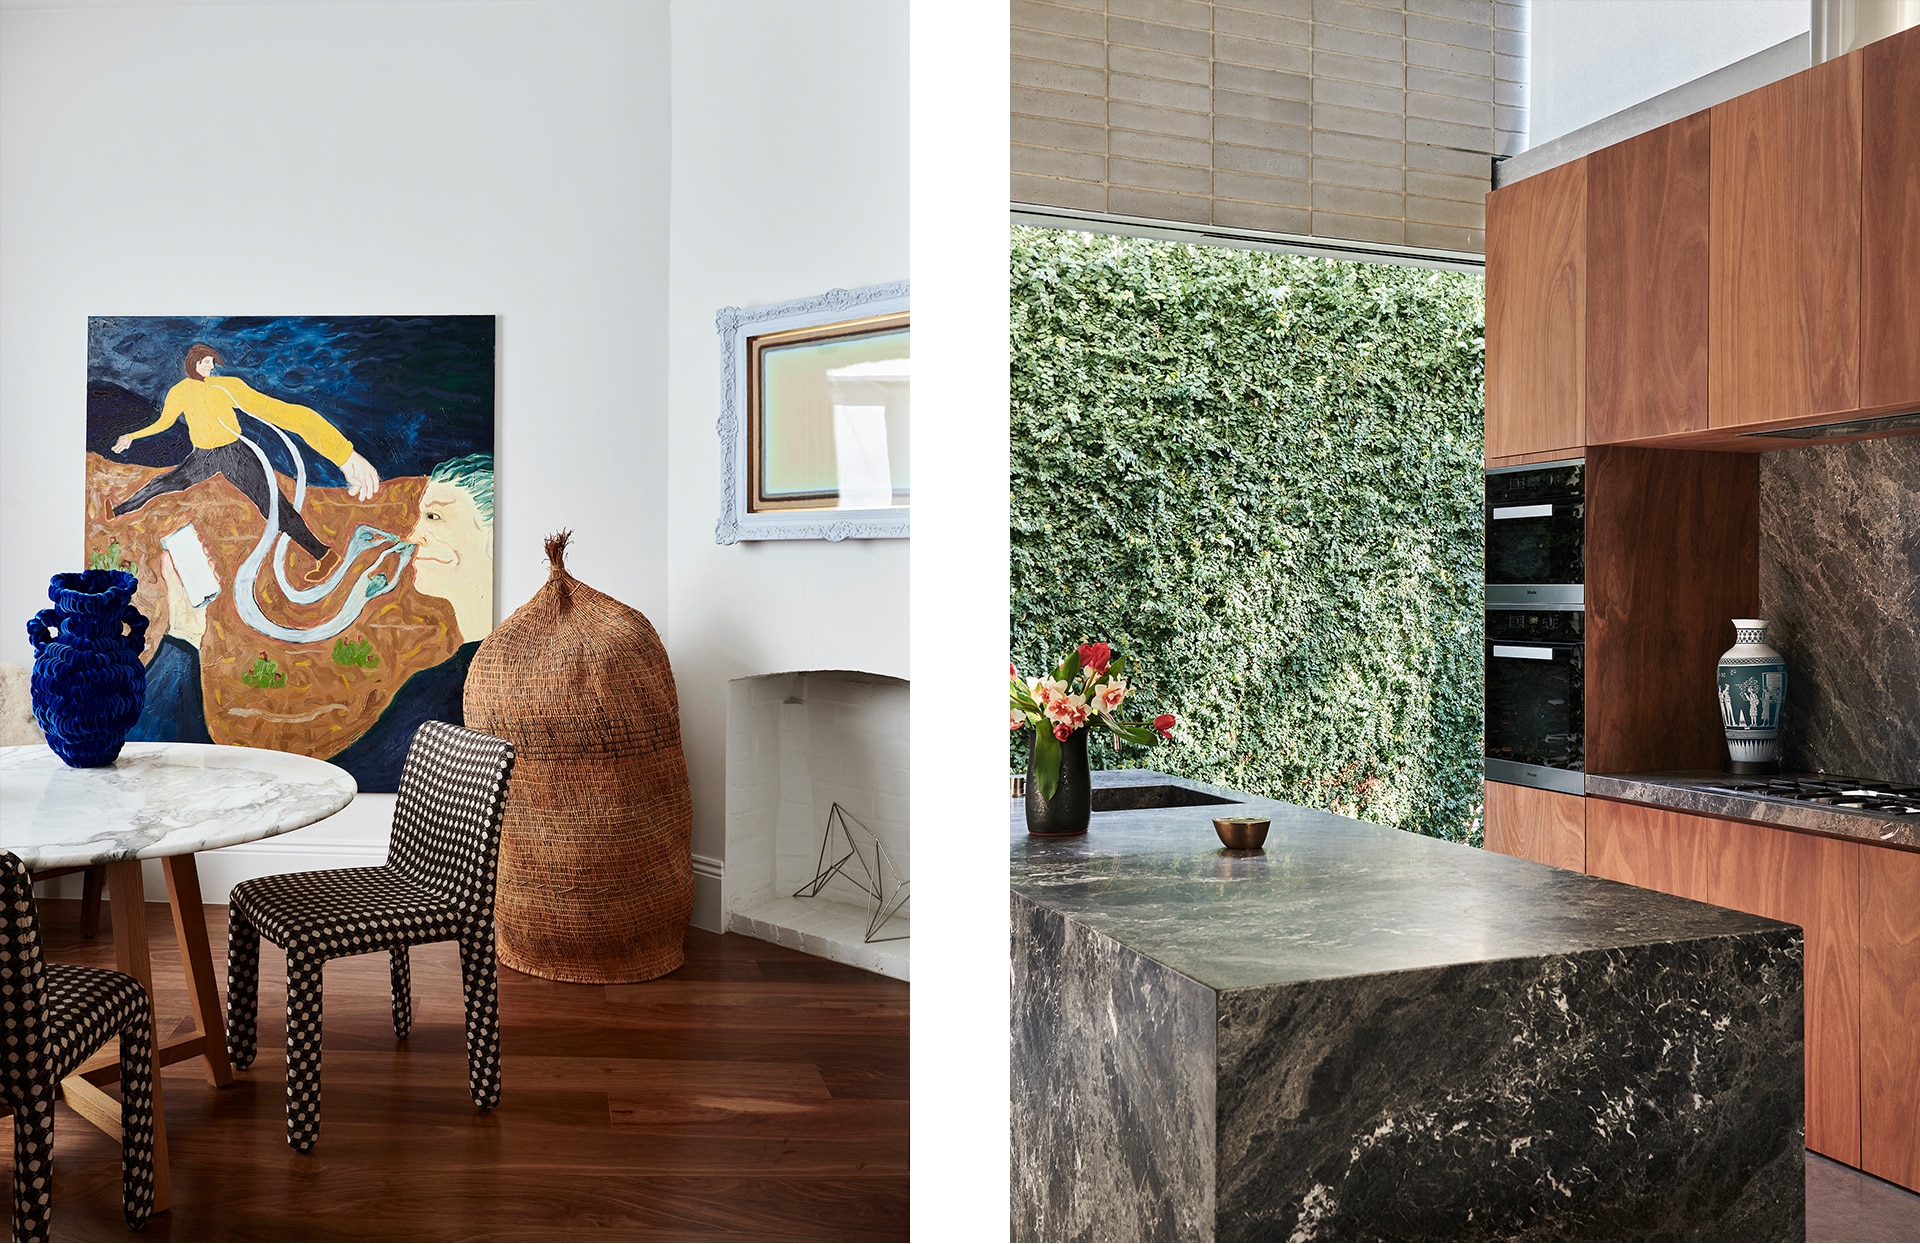 split image. left: marble and wood dining table with blue vase on top, patterned chair tucked in. artwork leans against wall. right: kitchen shot with marble counters and wood cupboards. green plant wall in background.